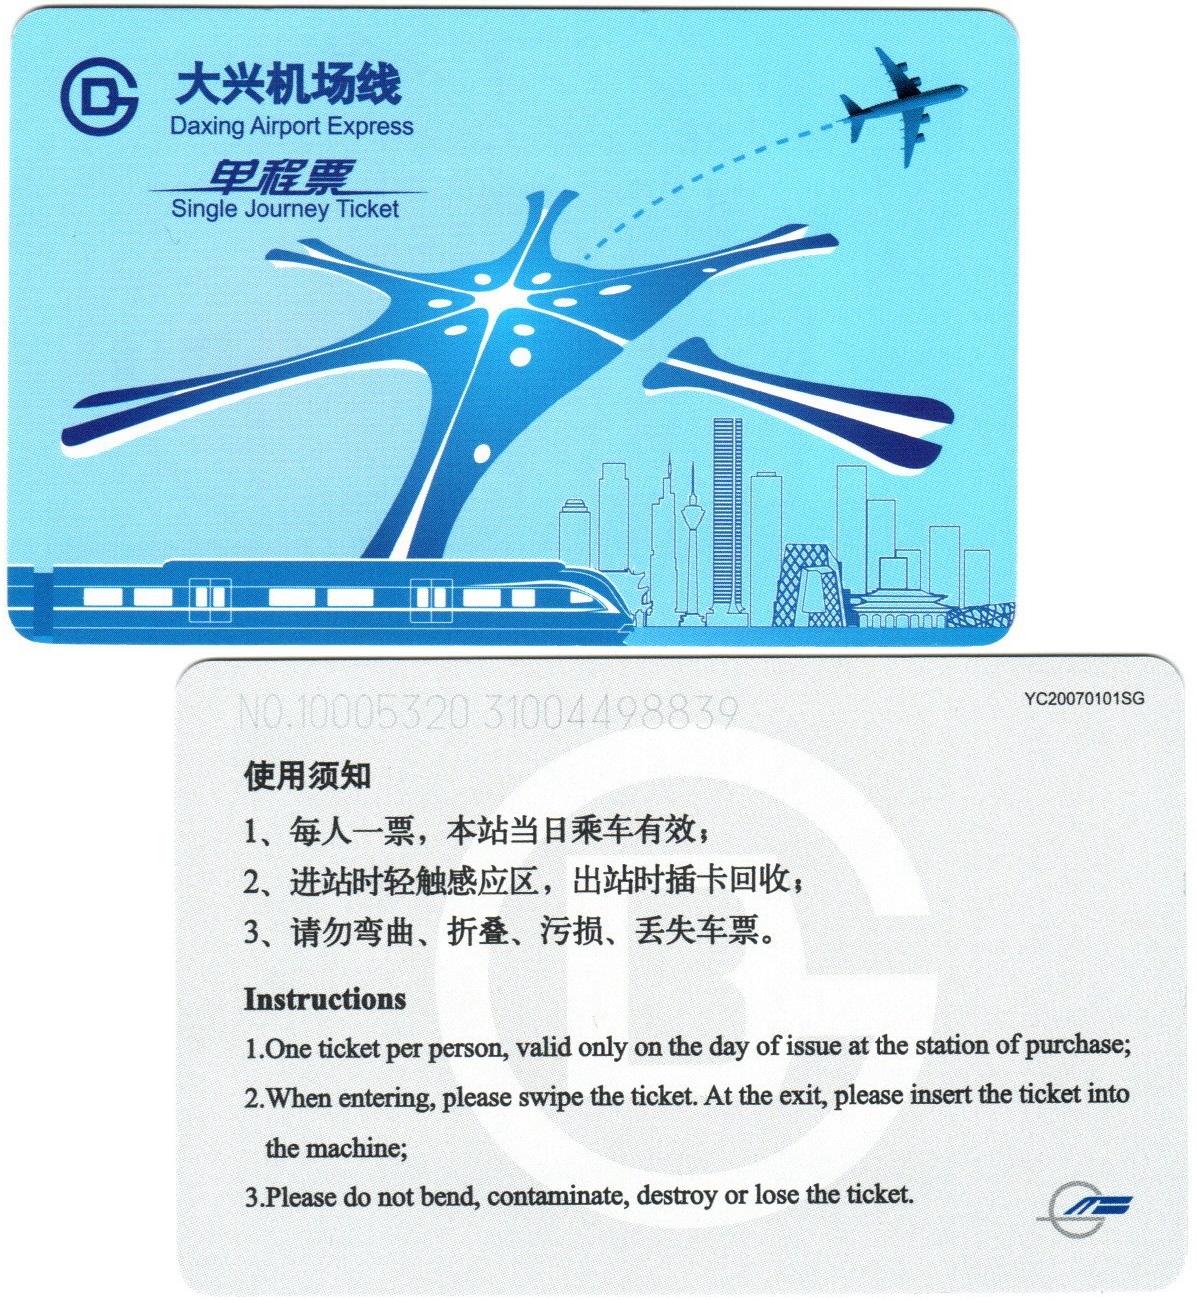 T5322, China Beijing City, New Daxing Airport Express Ticket, 2021, Invalid